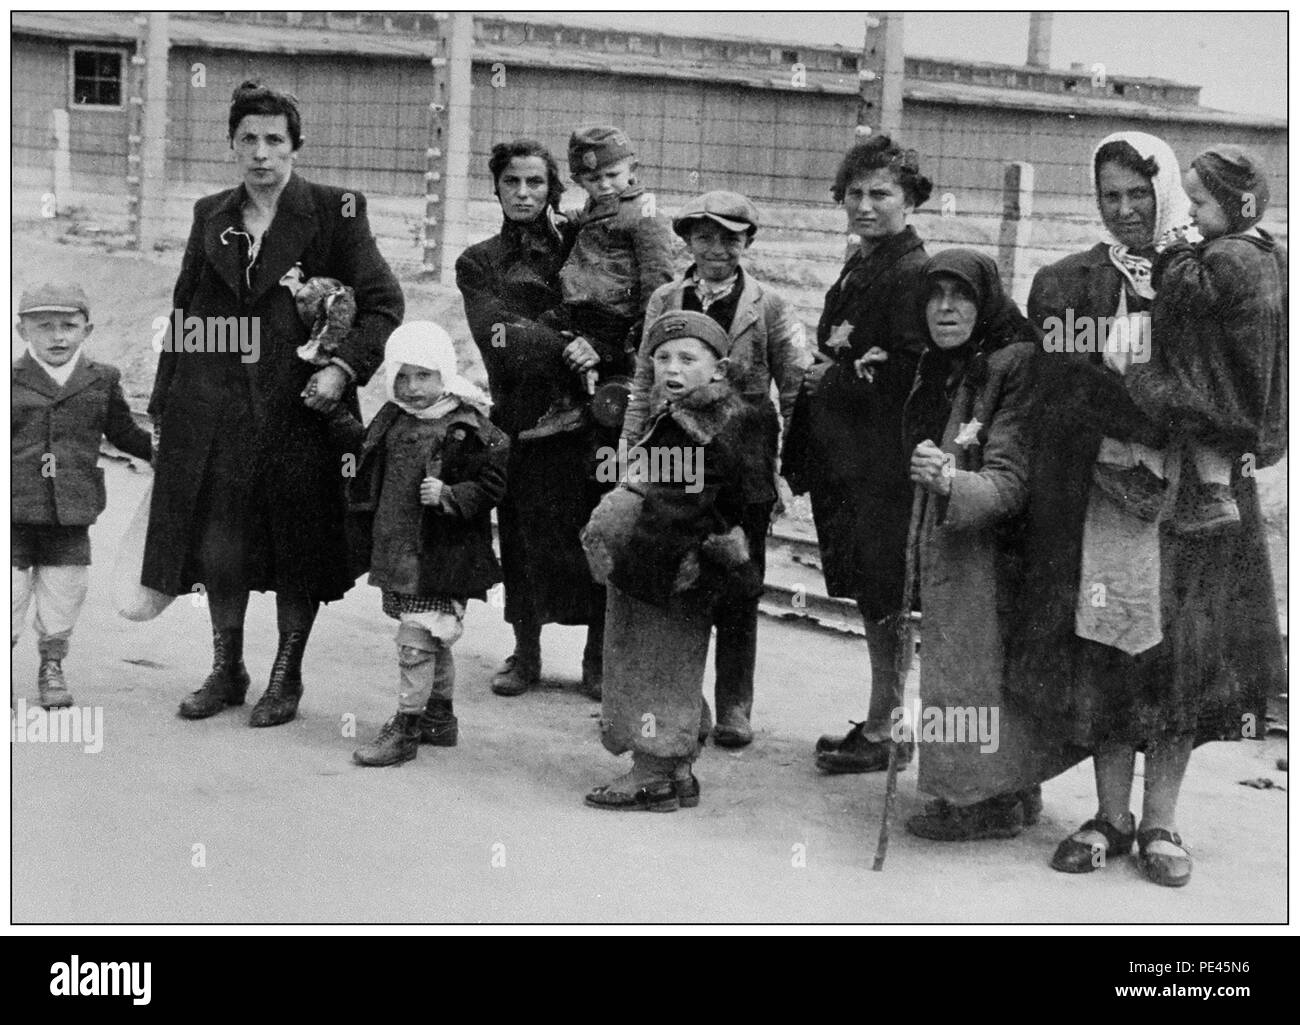 AUSCHWITZ Jewish children with their mothers and grandmothers arrive in Auschwitz-Birkenau. A WW2 German Nazi Concentration & Extermination camp. Jewish children made up the largest group of those deported to the camp. They were sent there along with adults, beginning in early 1942, as part of the “final solution of the Jewish question”—the total destruction of the Jewish population of Europe...Auschwitz concentration camp was a network of German Nazi concentration camps and extermination camps built and operated by the Third Reich in Polish areas annexed by Nazi Germany during World War II. Stock Photo